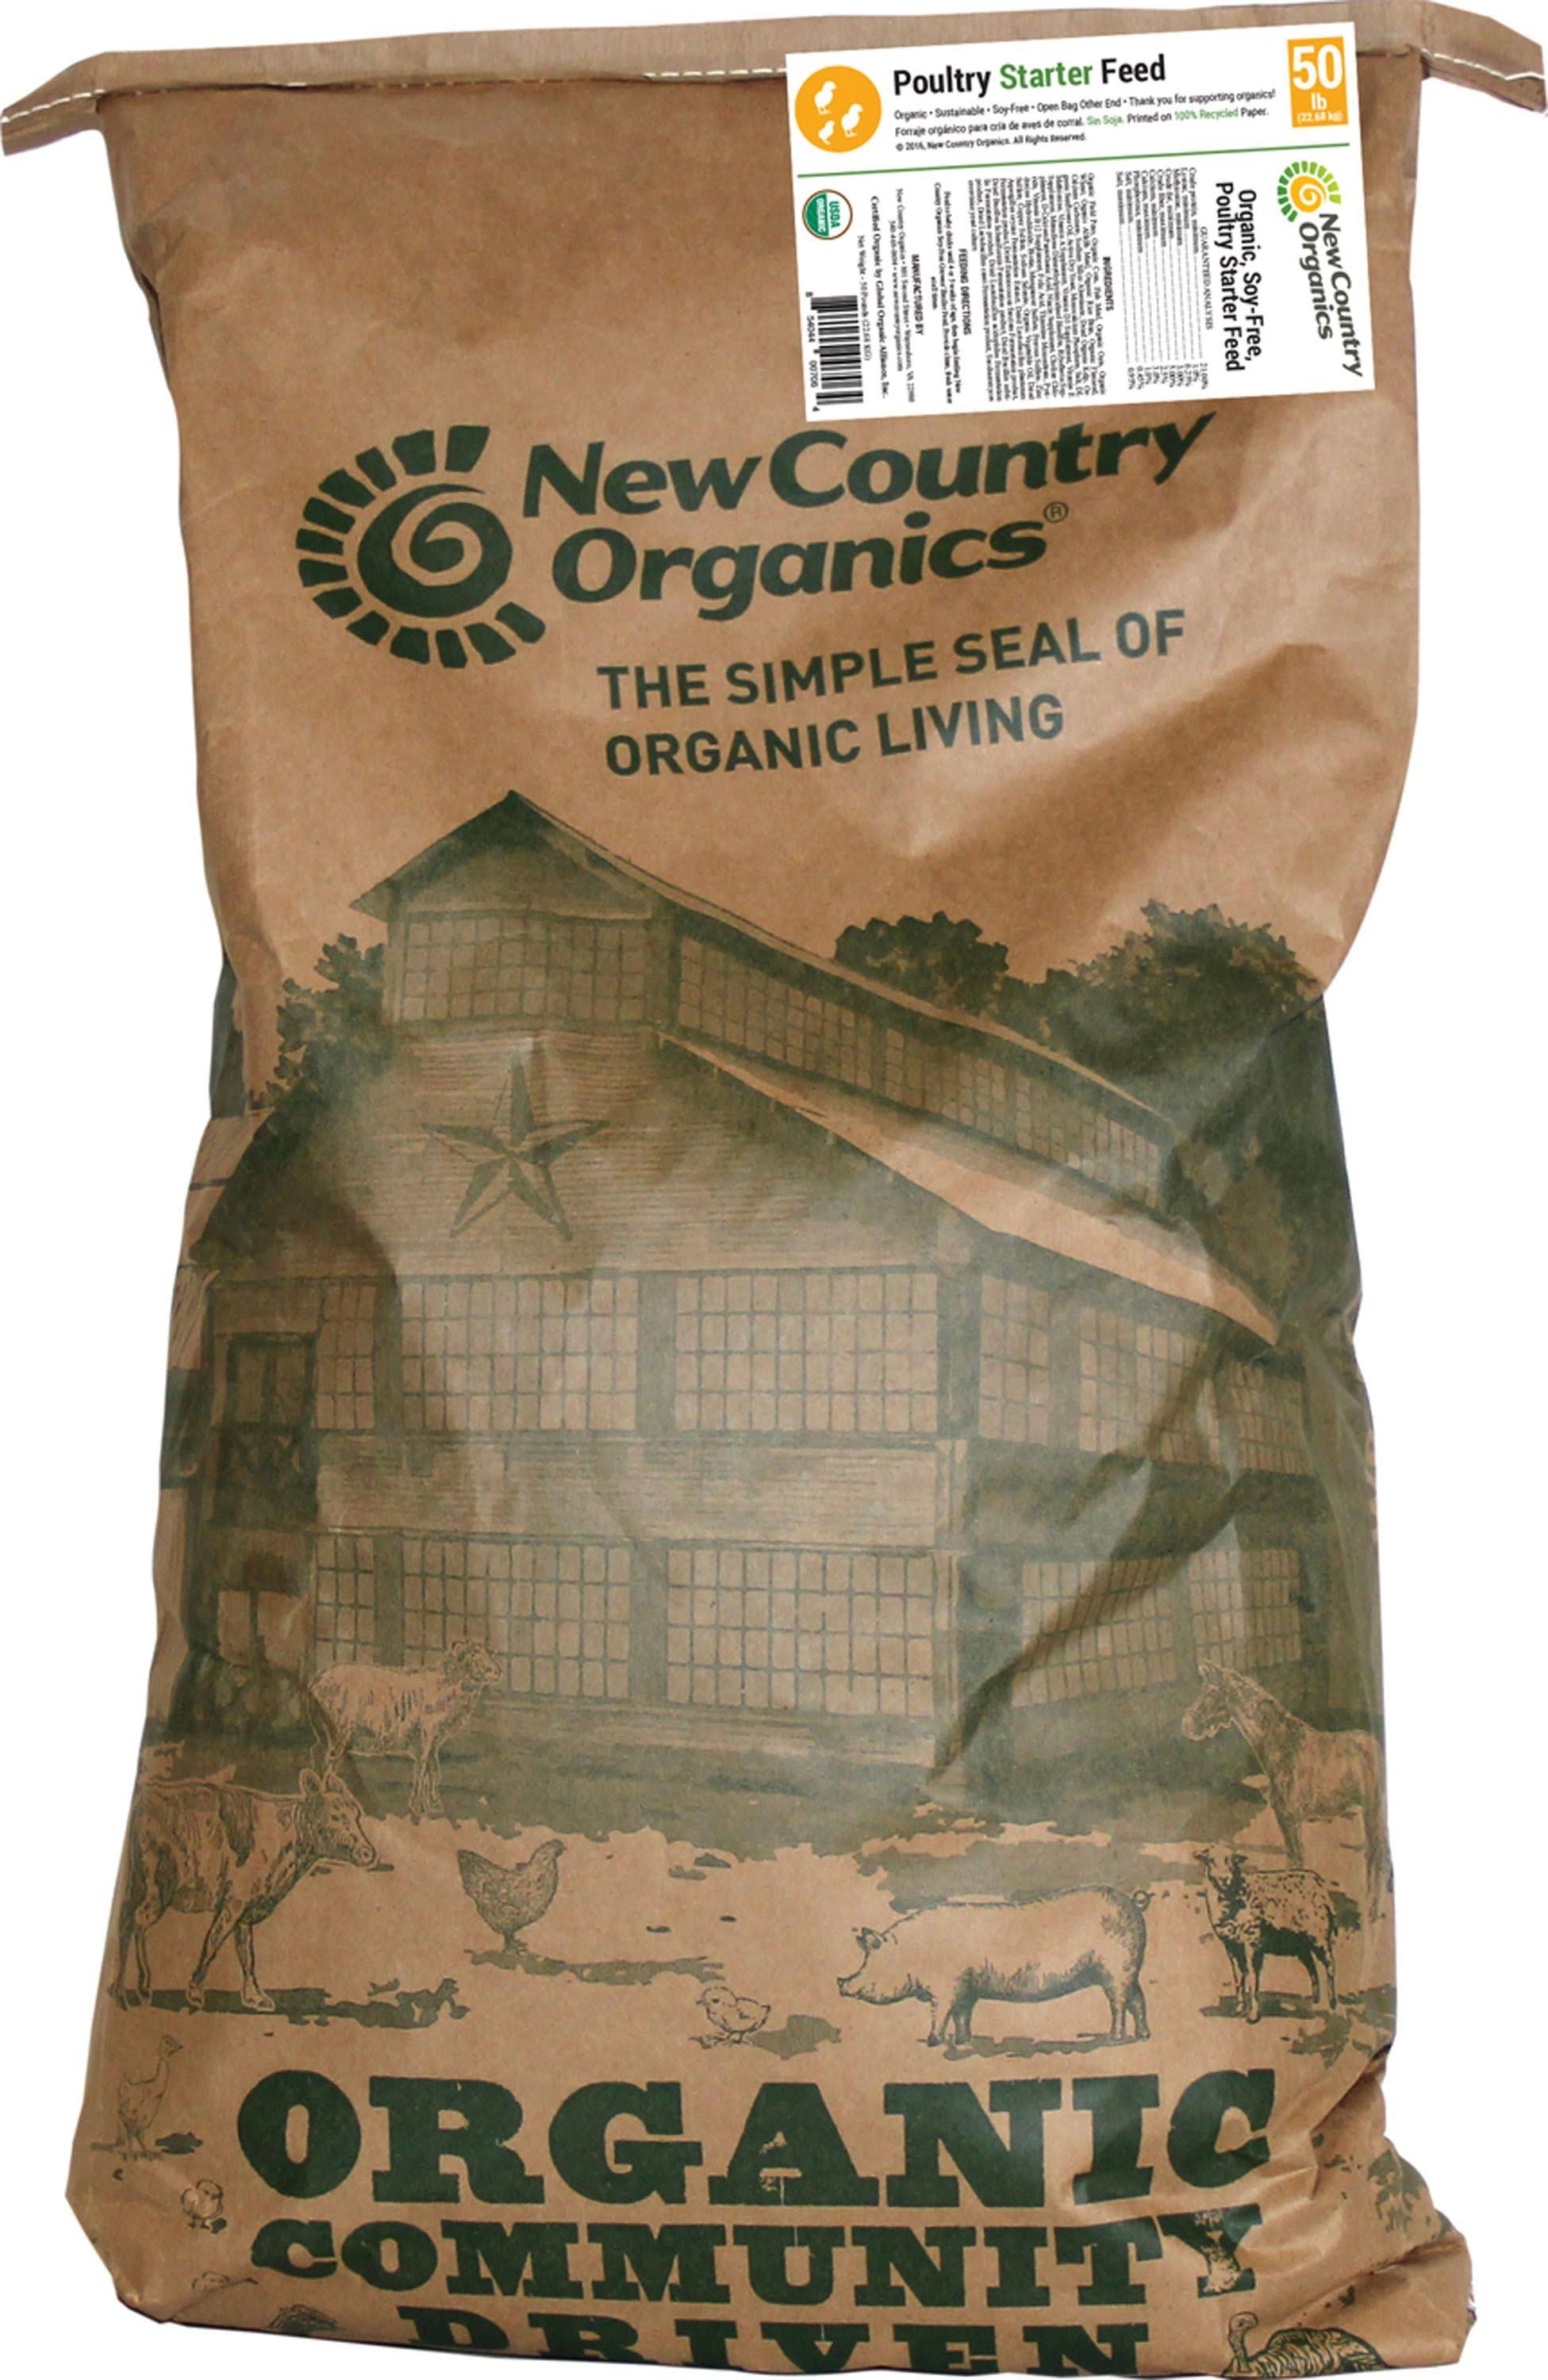 New Country Organics - Organic Soy Free Poultry Starter 50 lb